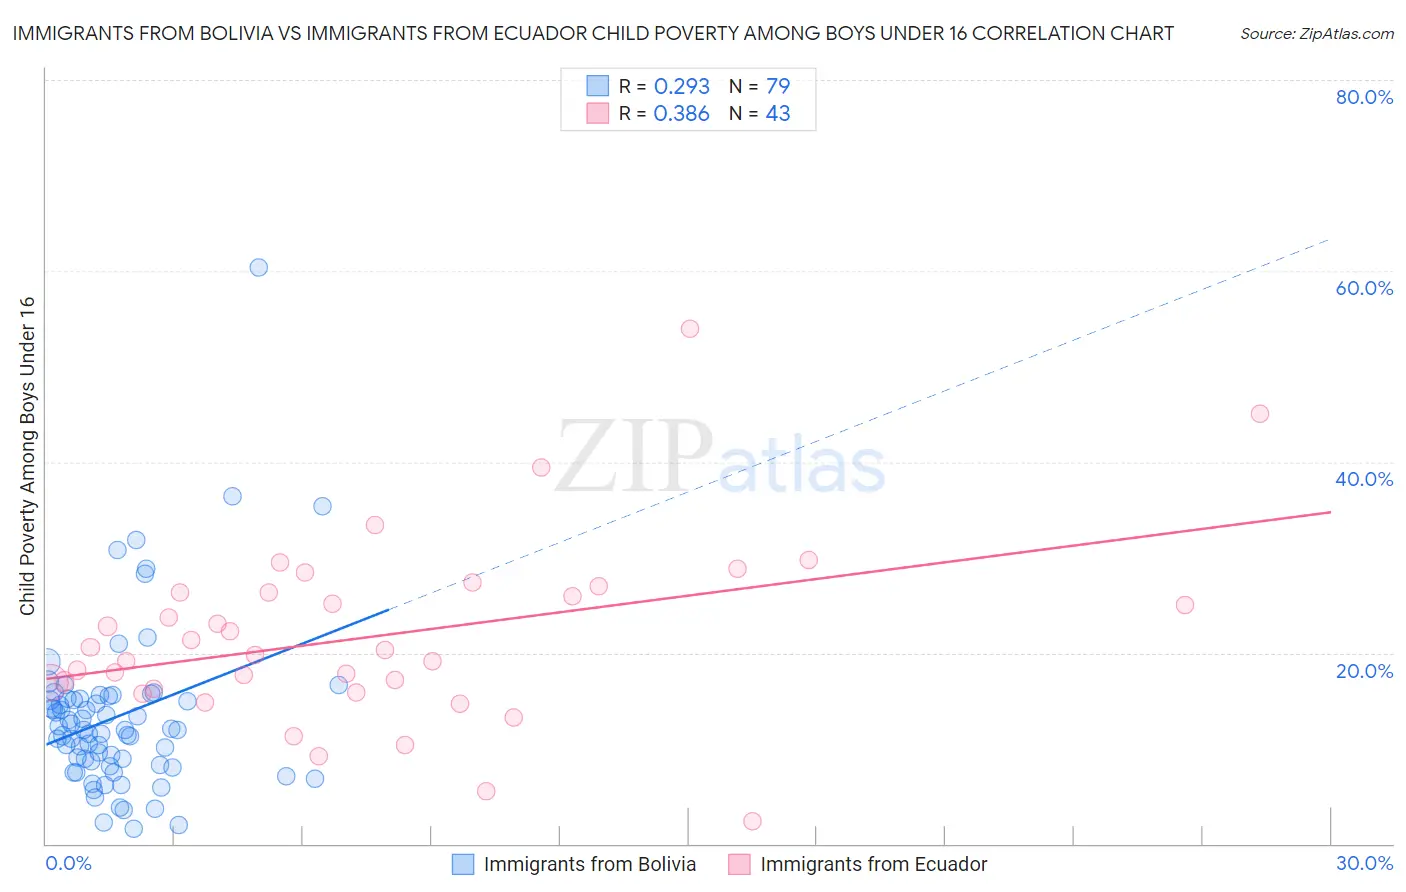 Immigrants from Bolivia vs Immigrants from Ecuador Child Poverty Among Boys Under 16